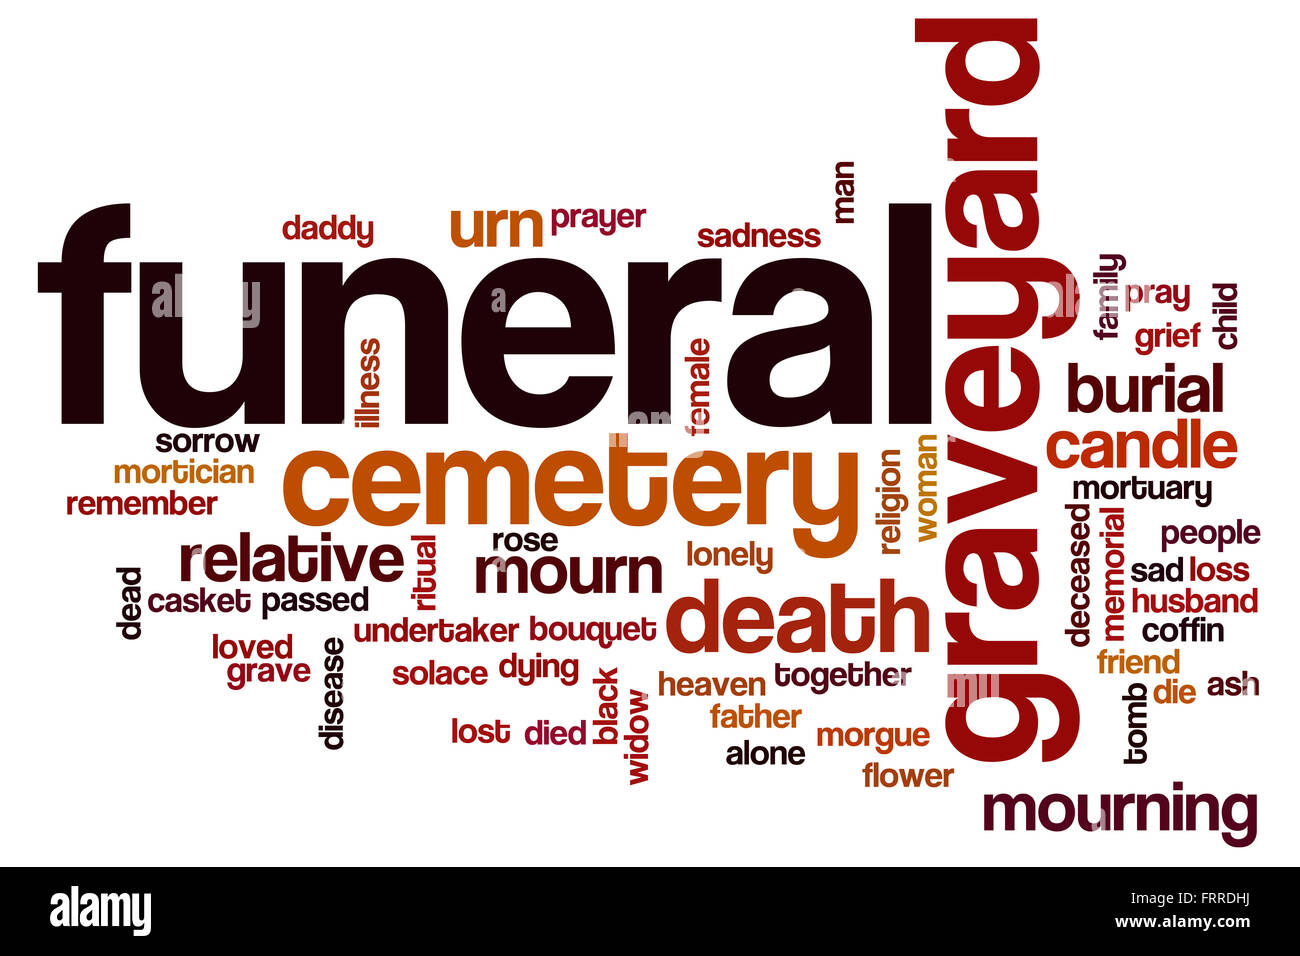 Funeral word cloud concept Stock Photo